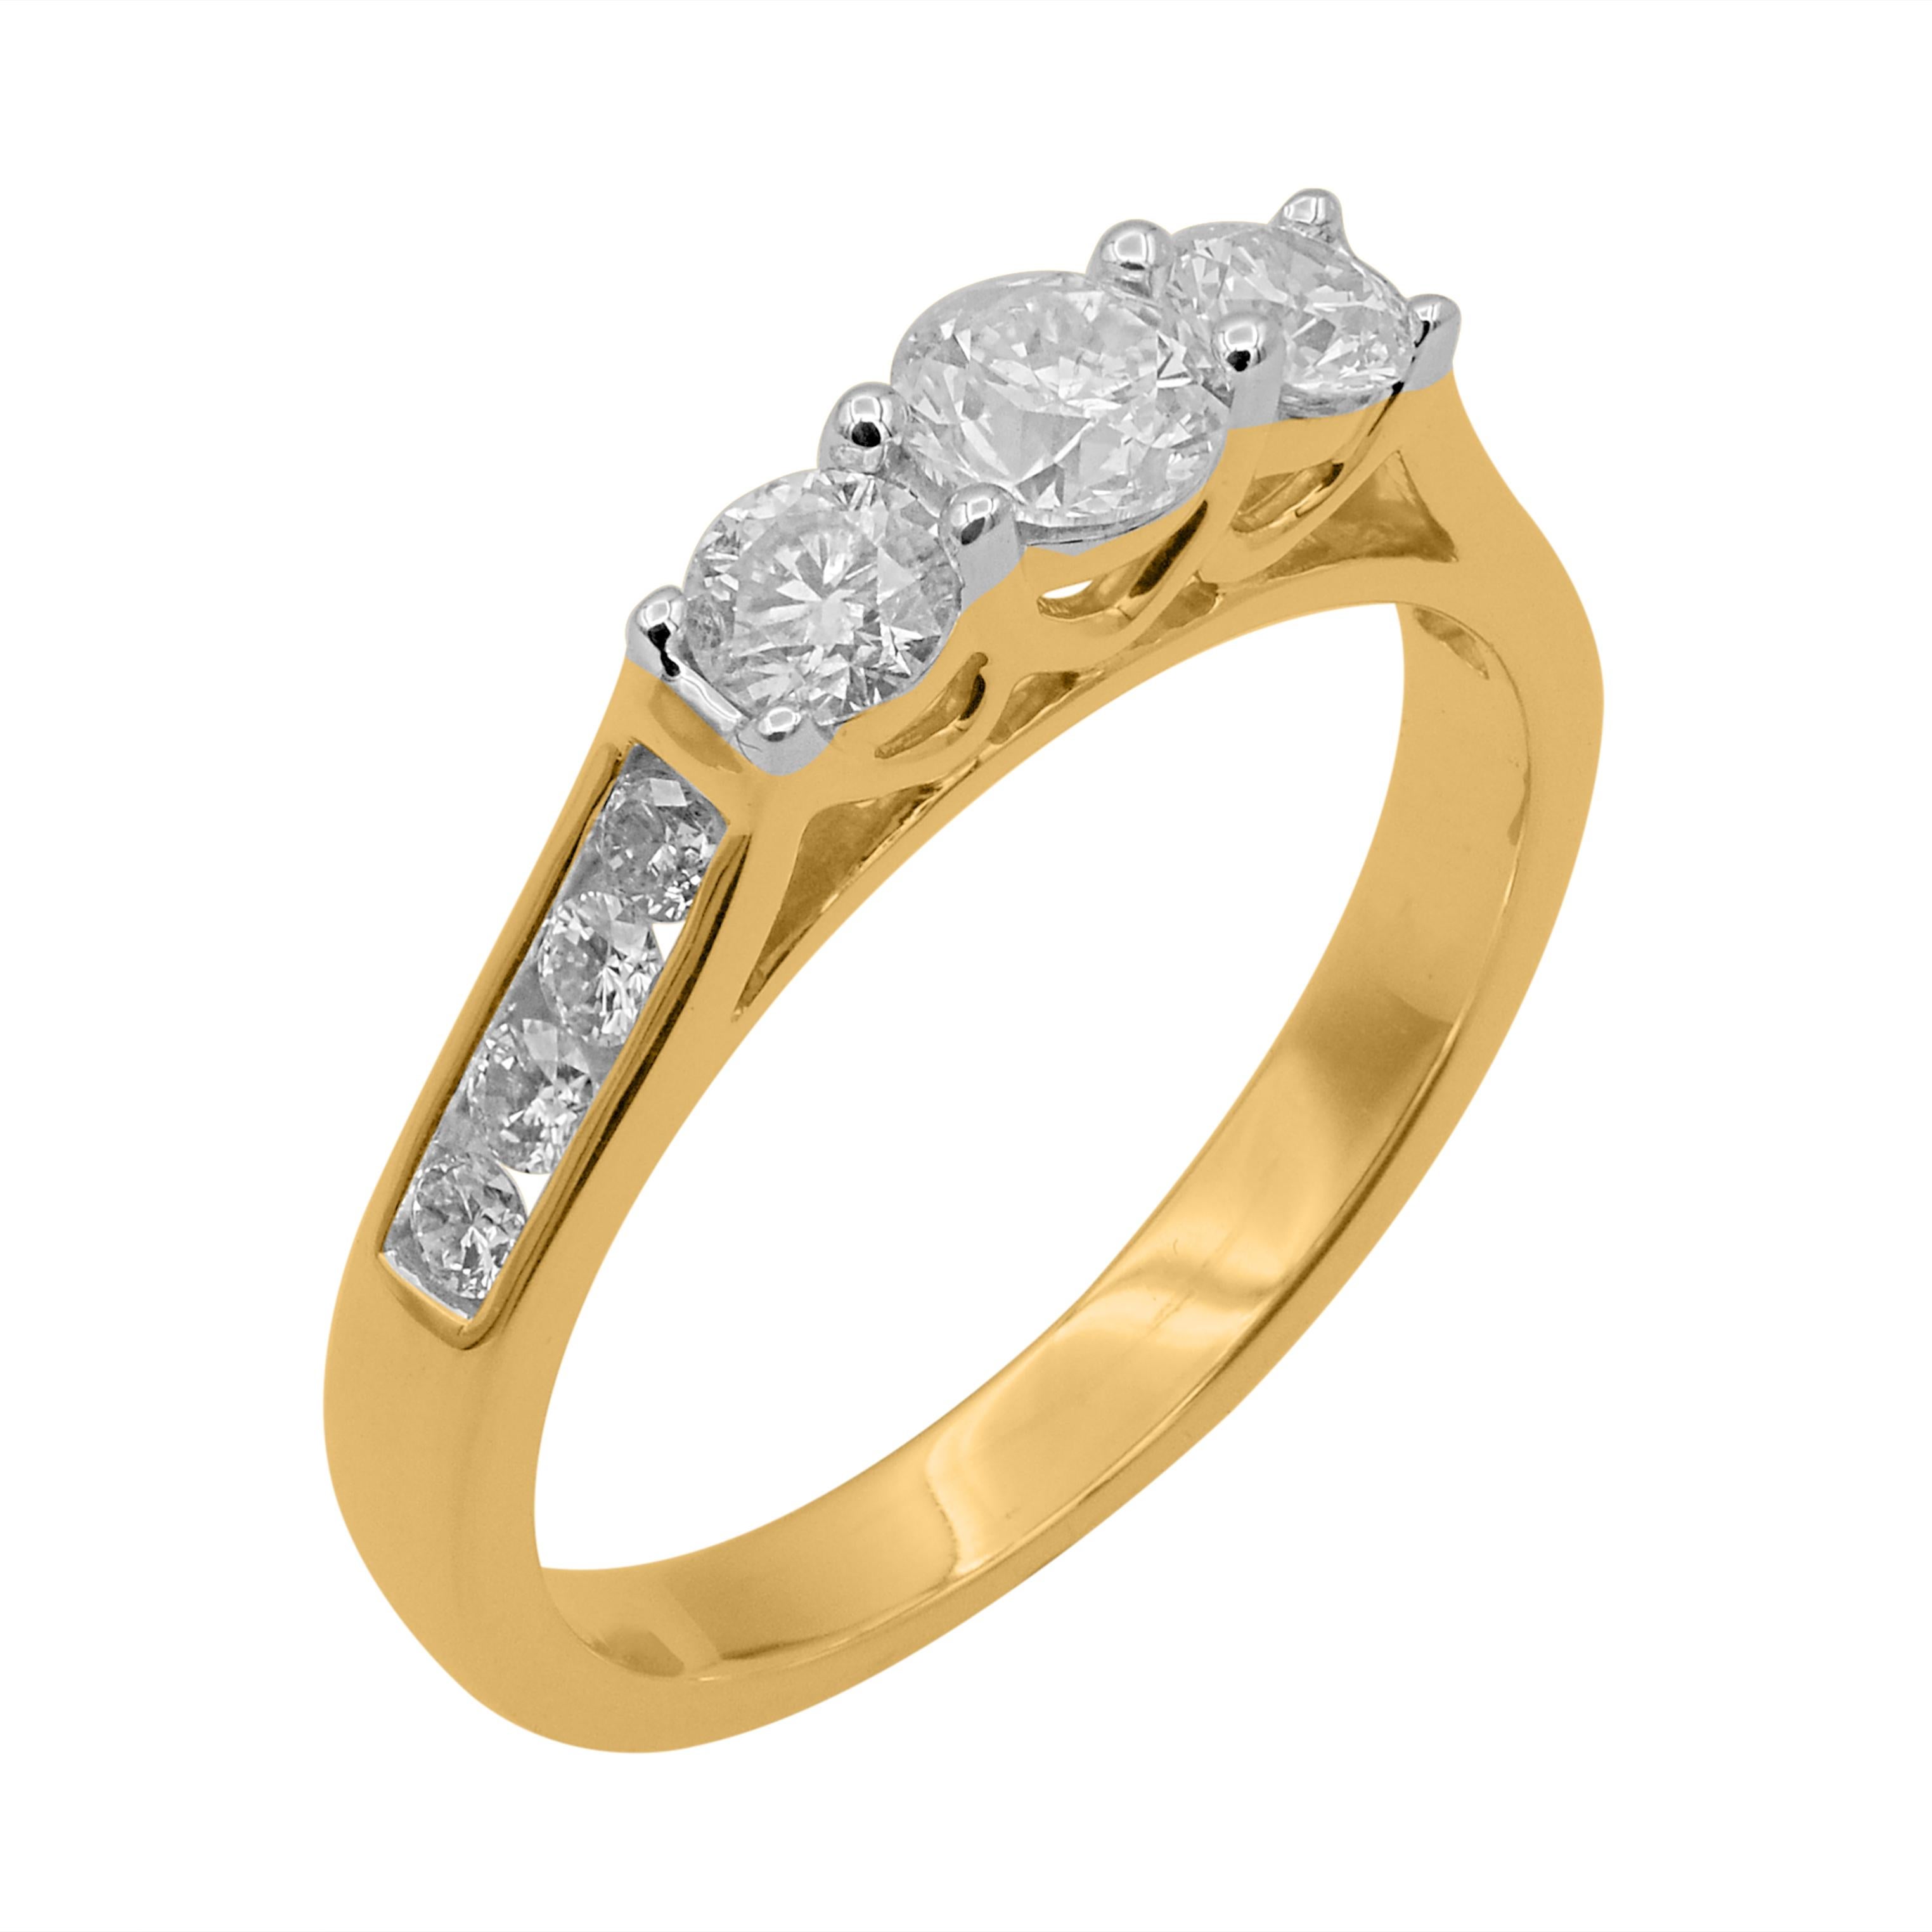 Beautifully, with a classic three stone diamond ring. These engagement ring are studded with 11 brilliant cut round diamonds in prong & channel setting. Ring is crafted in 14kt yellow gold. The white diamonds are graded as H-I color and I-2 clarity.